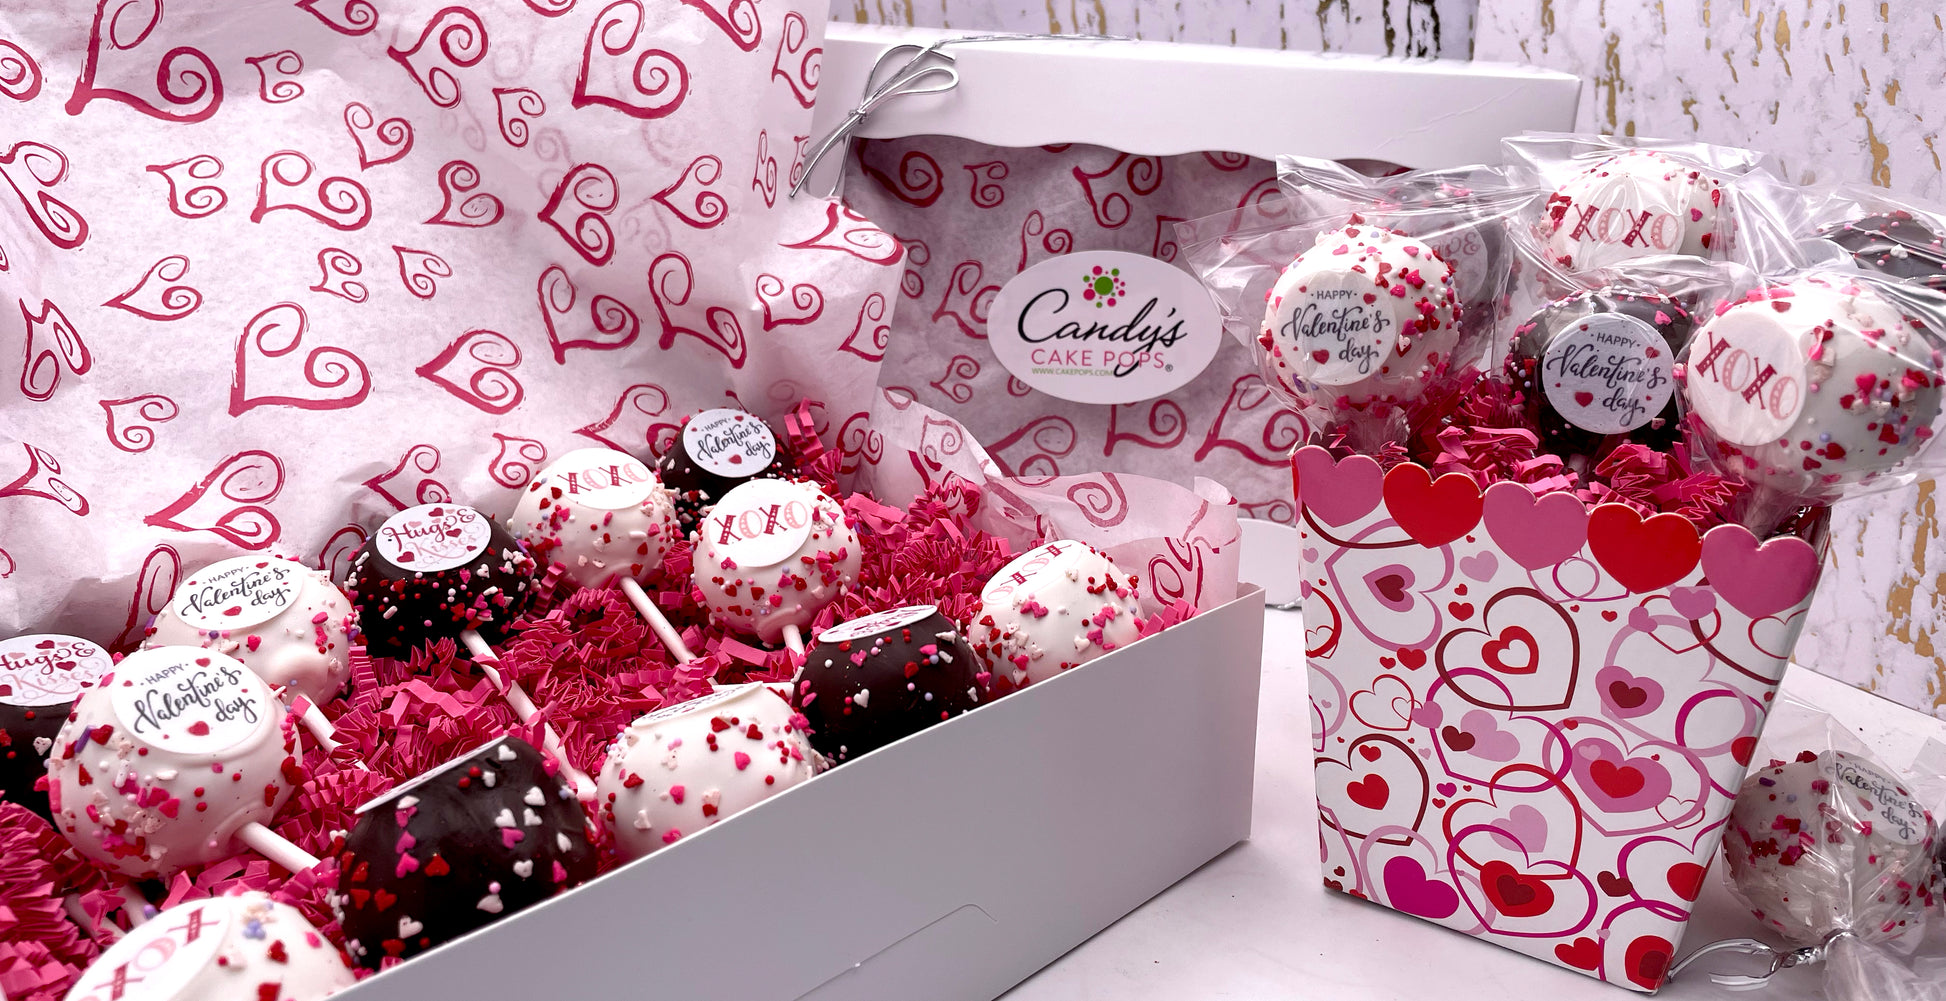 Happy Valentine's Day Decal Cake Pops - Candy's Cake Pops